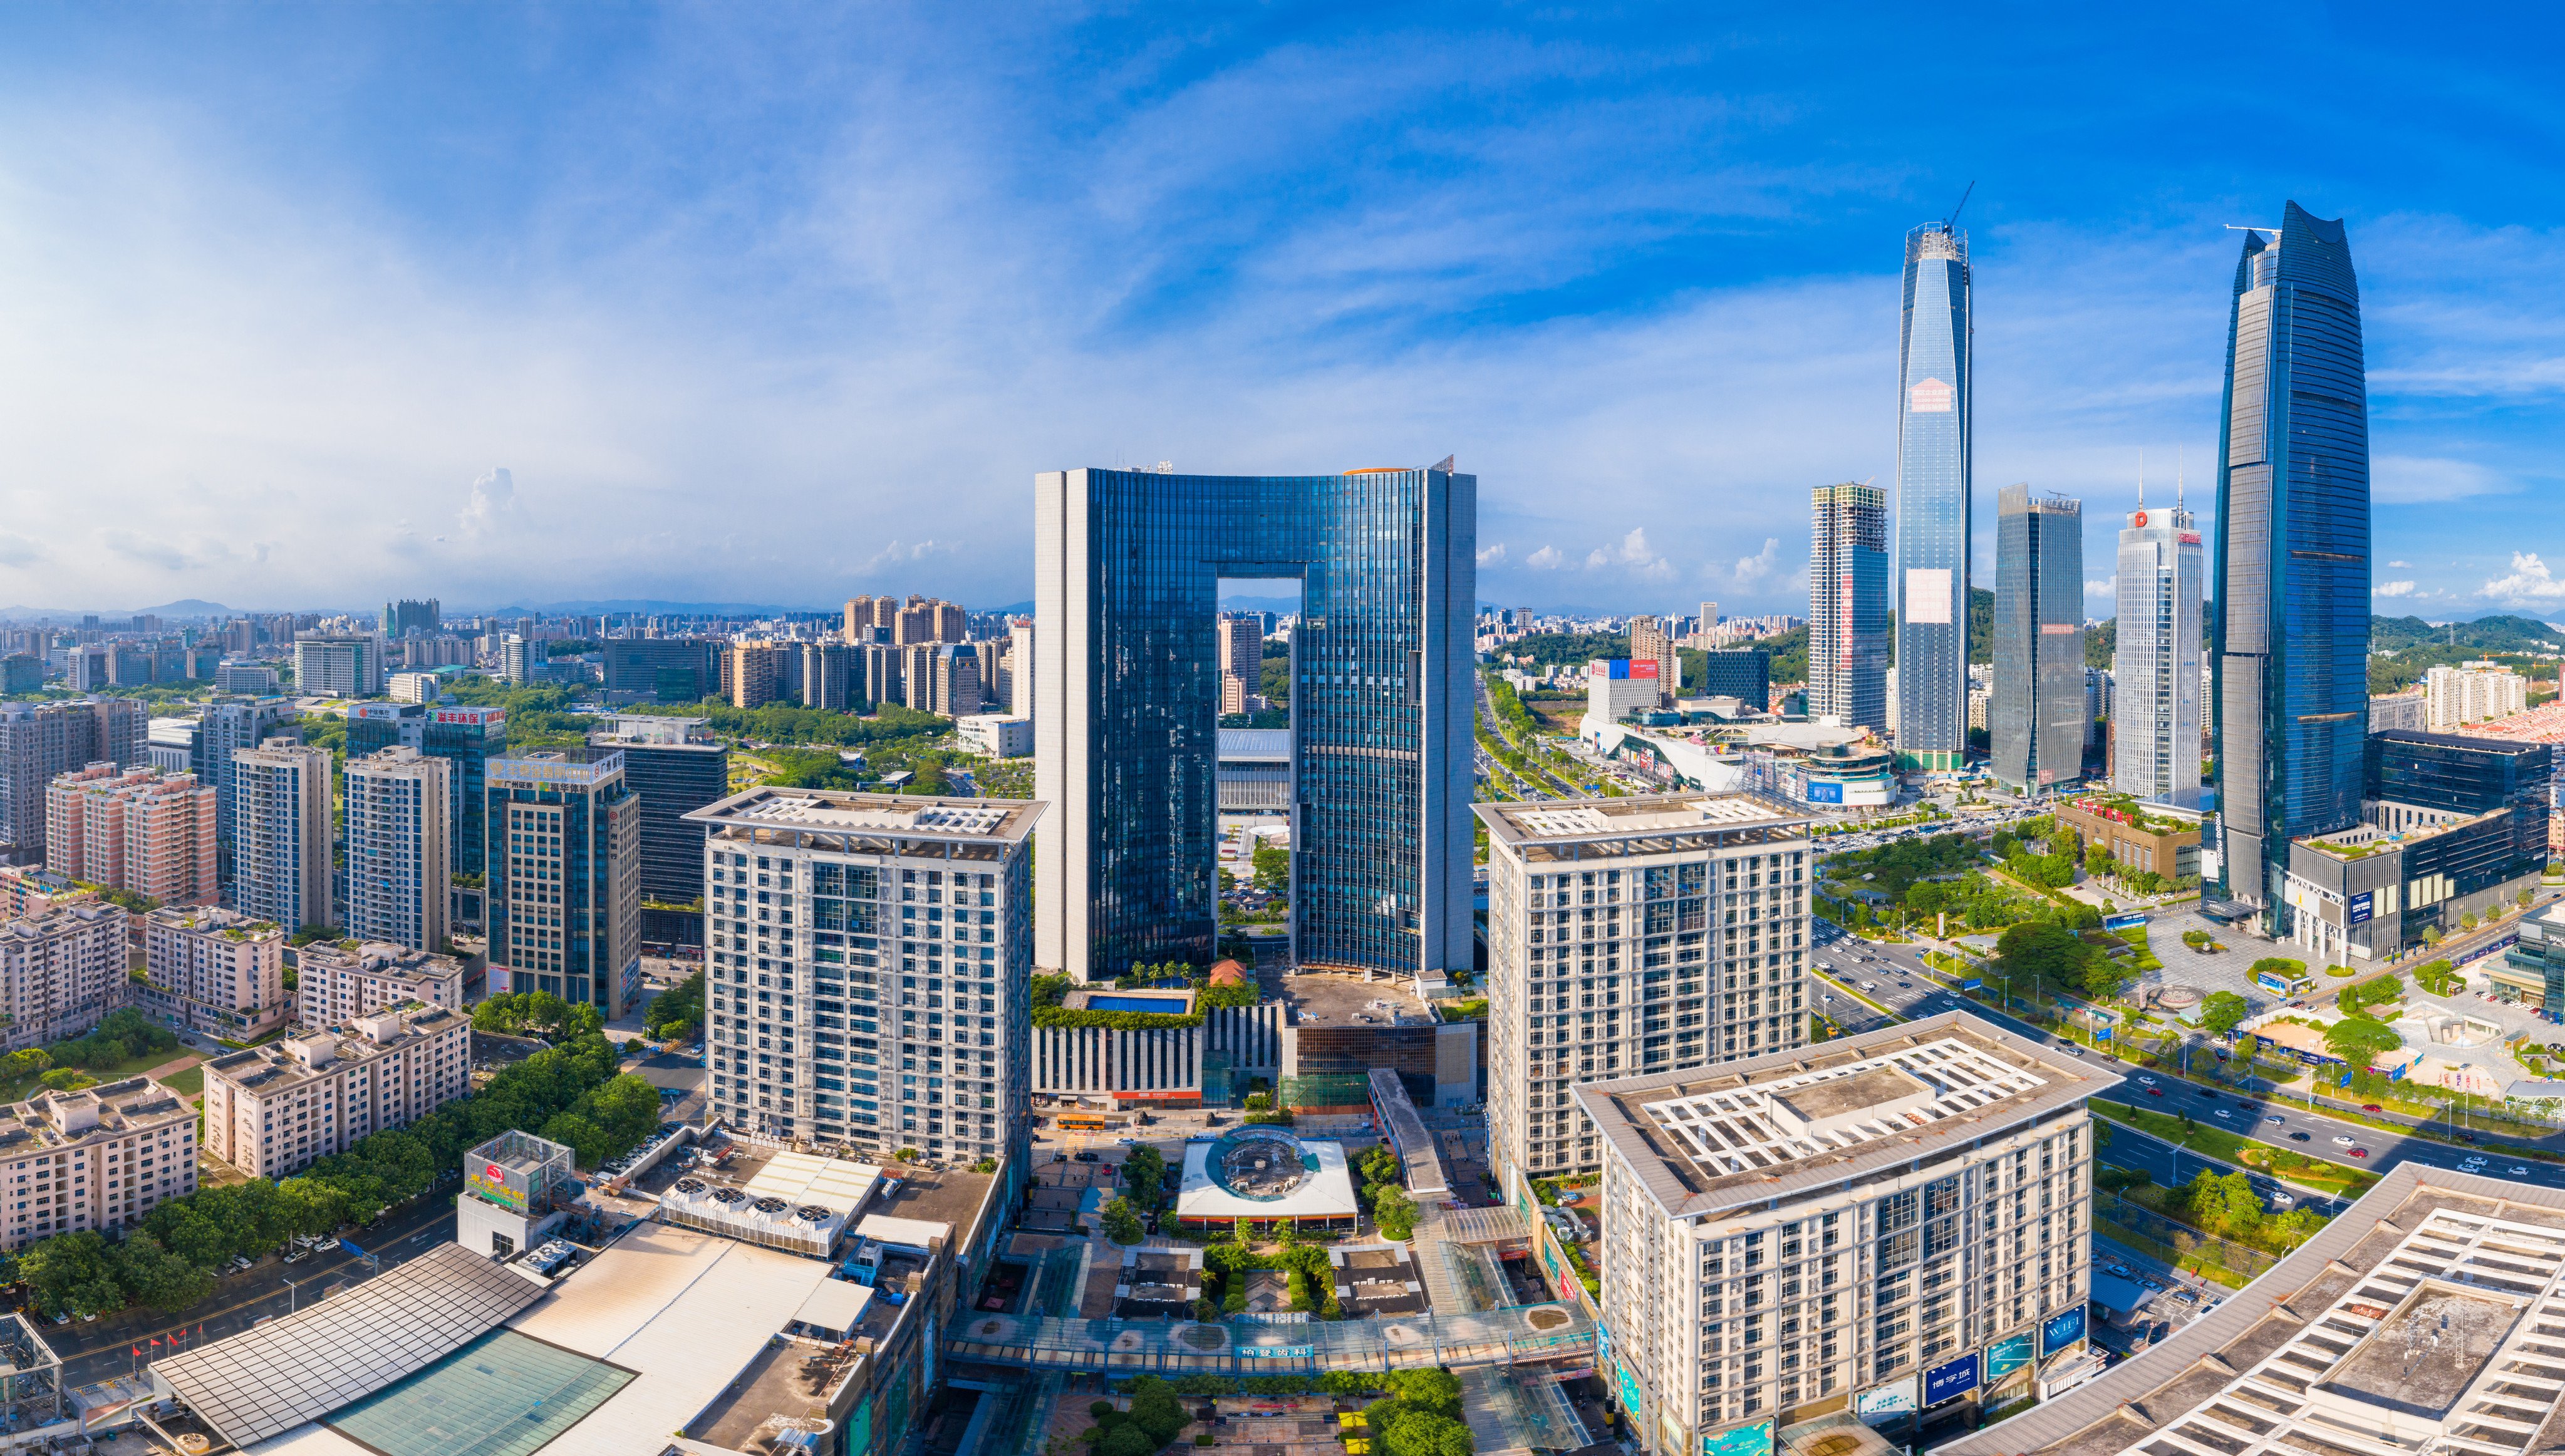 The skyline of Dongguan, Guangdong province, China, pictured in 2021. Photo:  Shutterstock